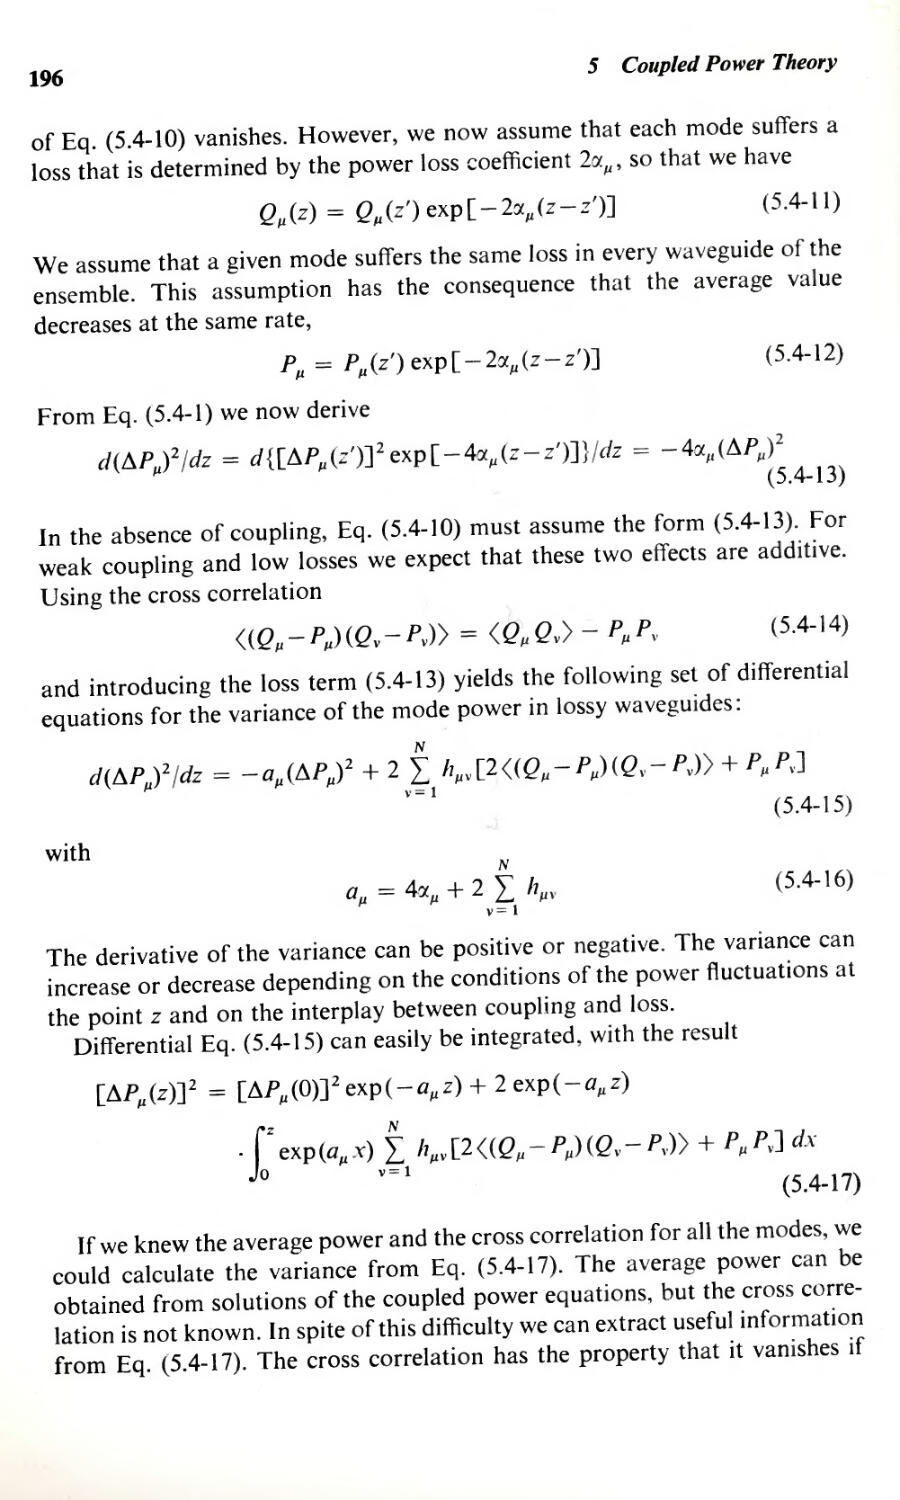 Cross correlation, 196
Derivative of variance, 196
--- for variance, 196
--- differential equation, 196